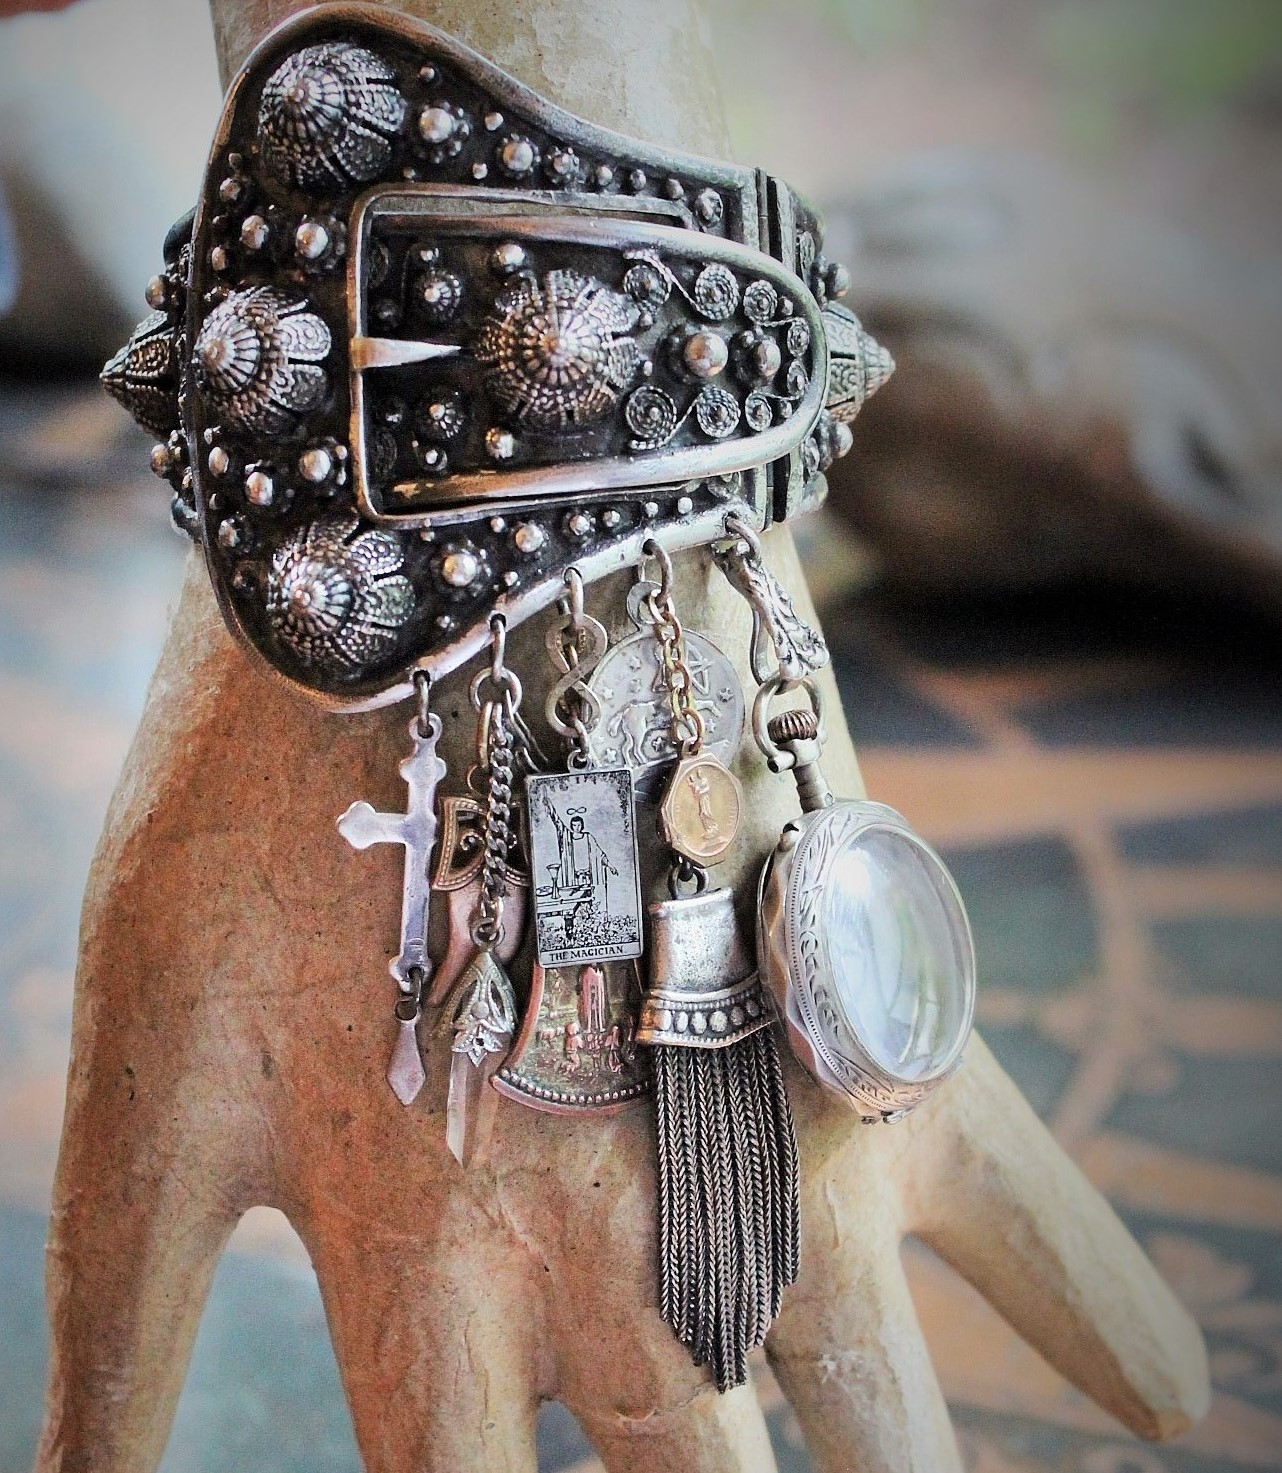 Gypsy Soul Cuff Bracelet w/Antique Etrusceana Silver Buckle Cuff, Antique Sterling Locket w/Saint Sarah of the Gypsies Image,Sterling 'The Magician' Tarot Medal & Much More!